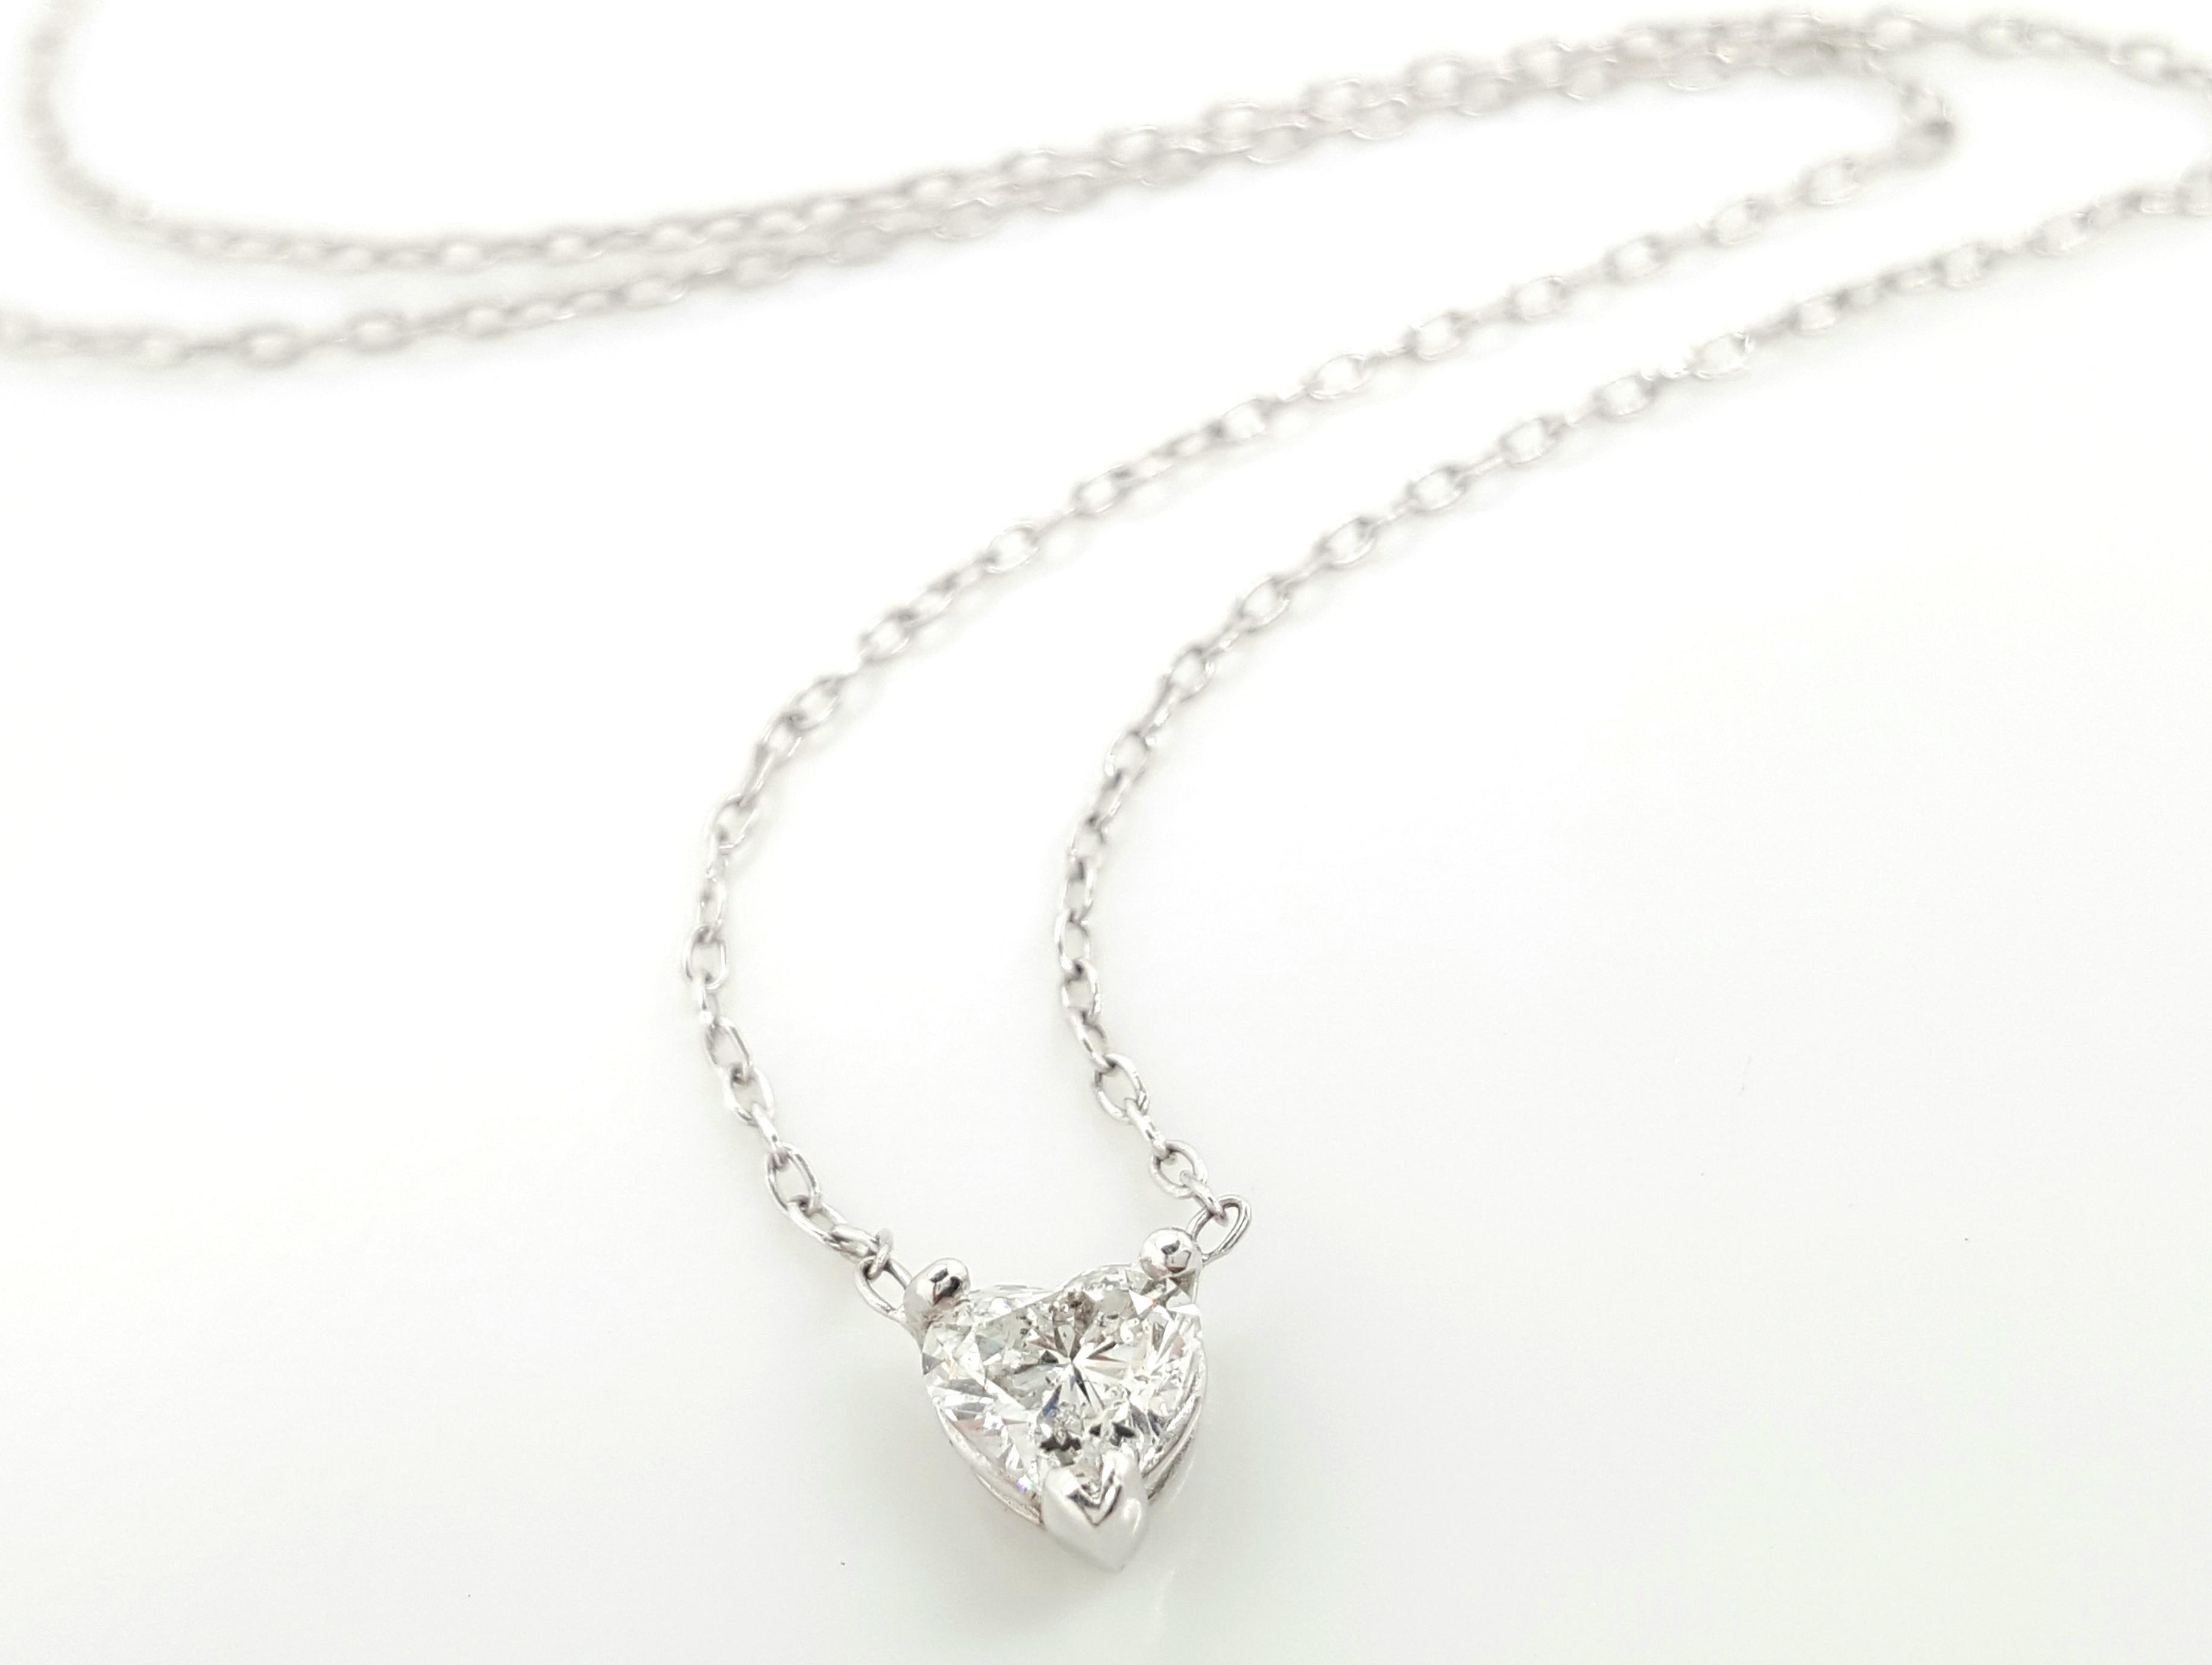 Diamond Heart Solitaire Pendant Necklace includes a 0.40 carat heart diamond center set in a basket setting hugged by 3 prongs. It is hanging on a 14K white gold 16” Cable chain. It is the perfect everyday necklace that is also great for